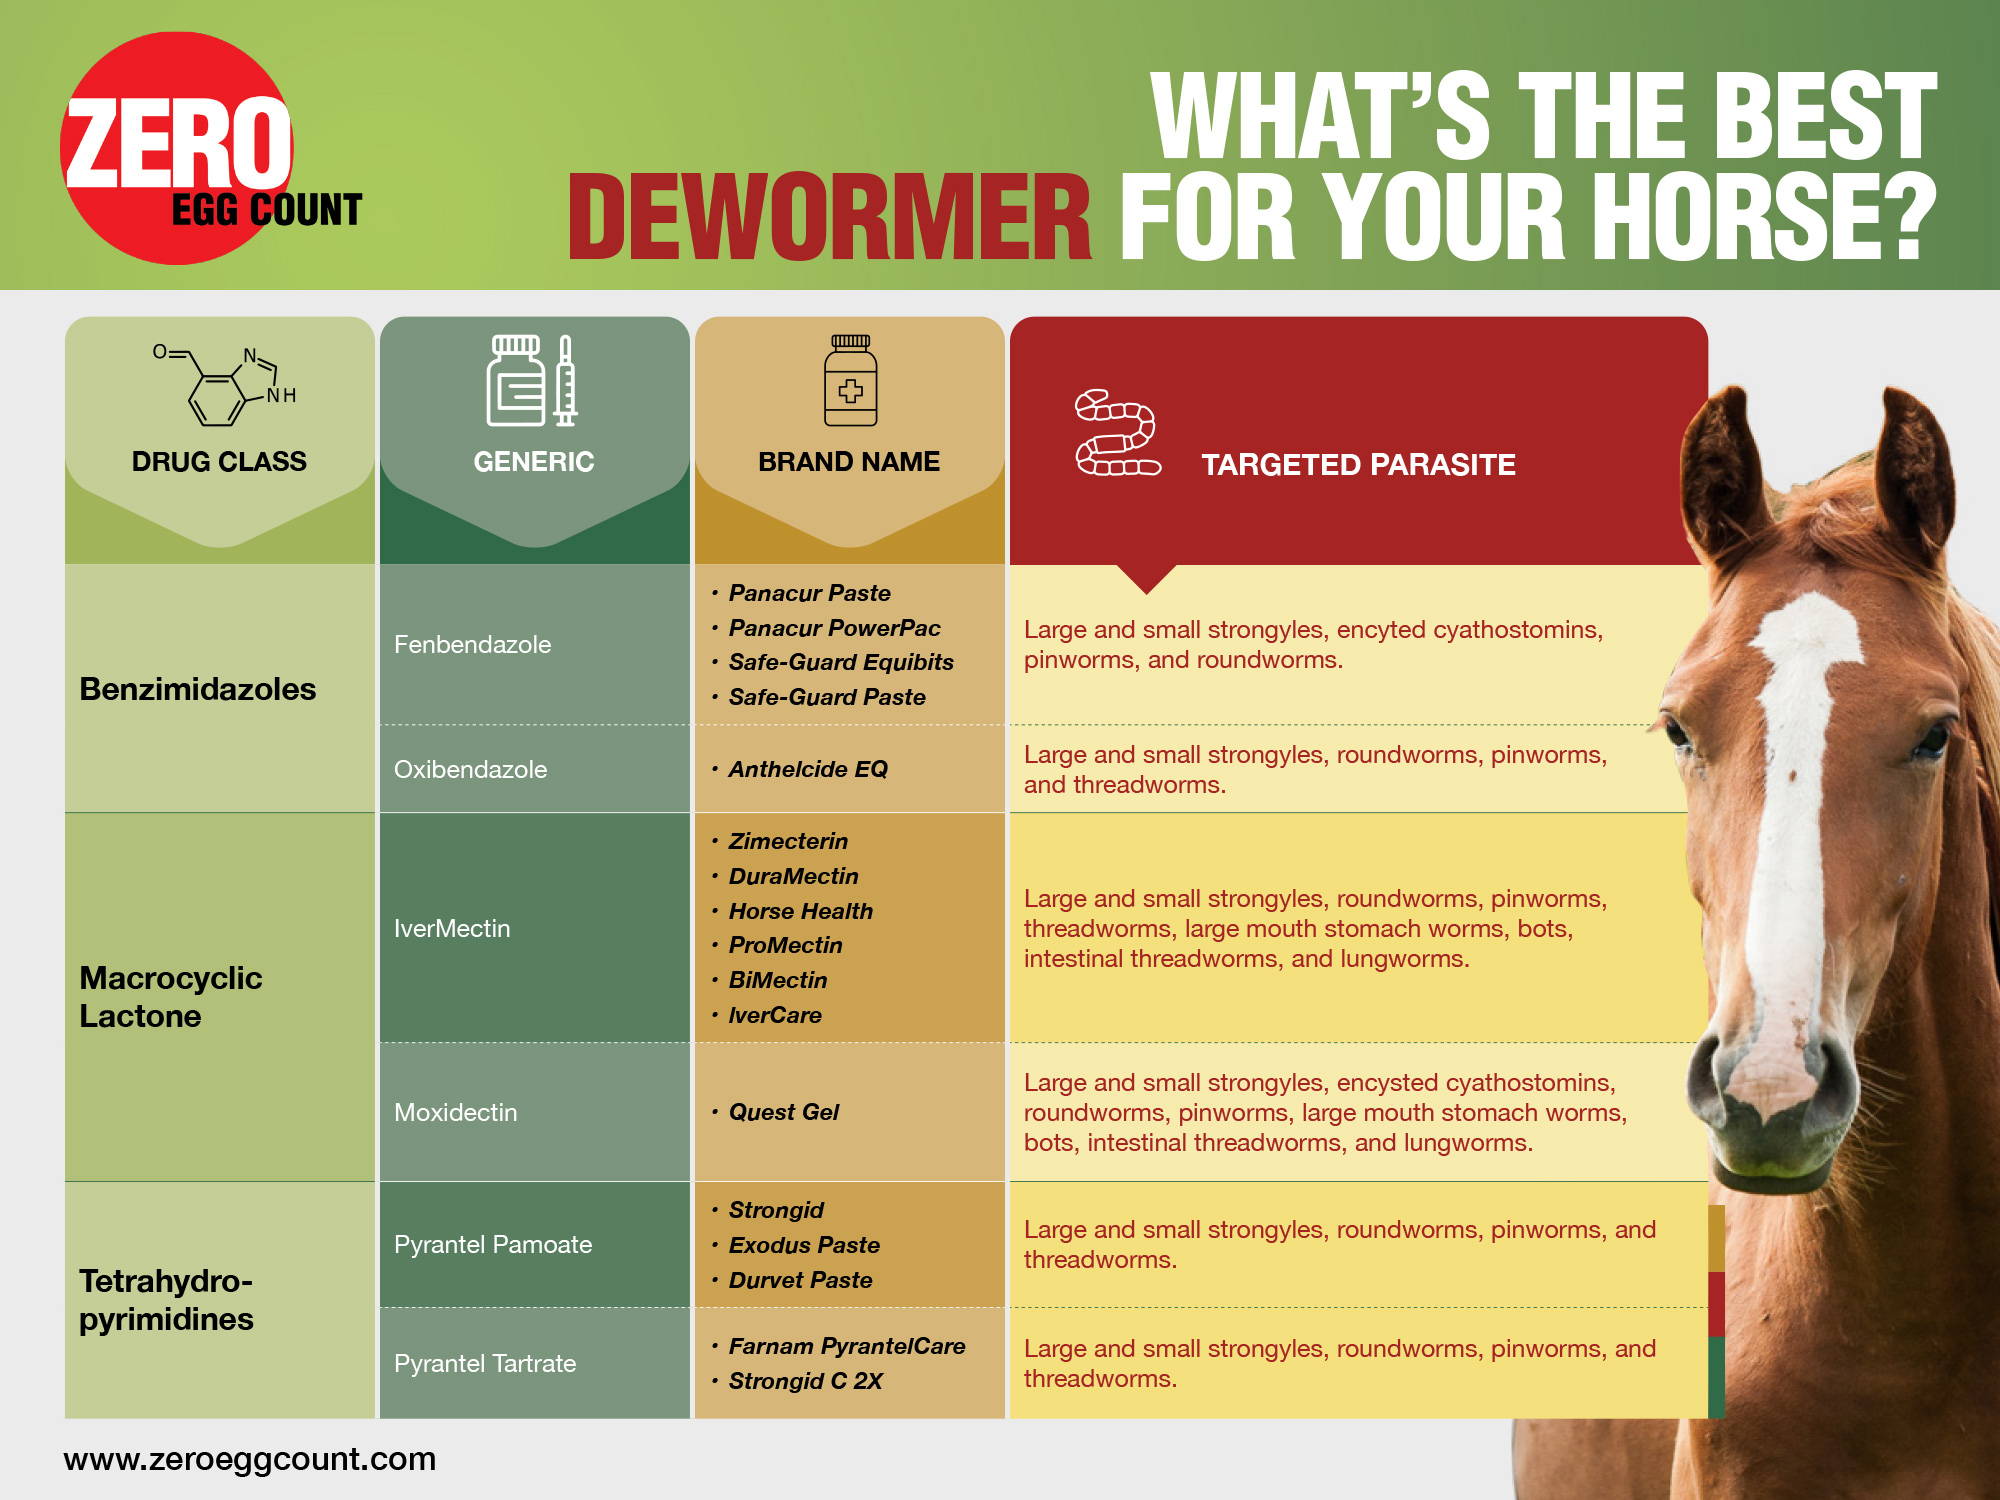 Table showing horse dewormers